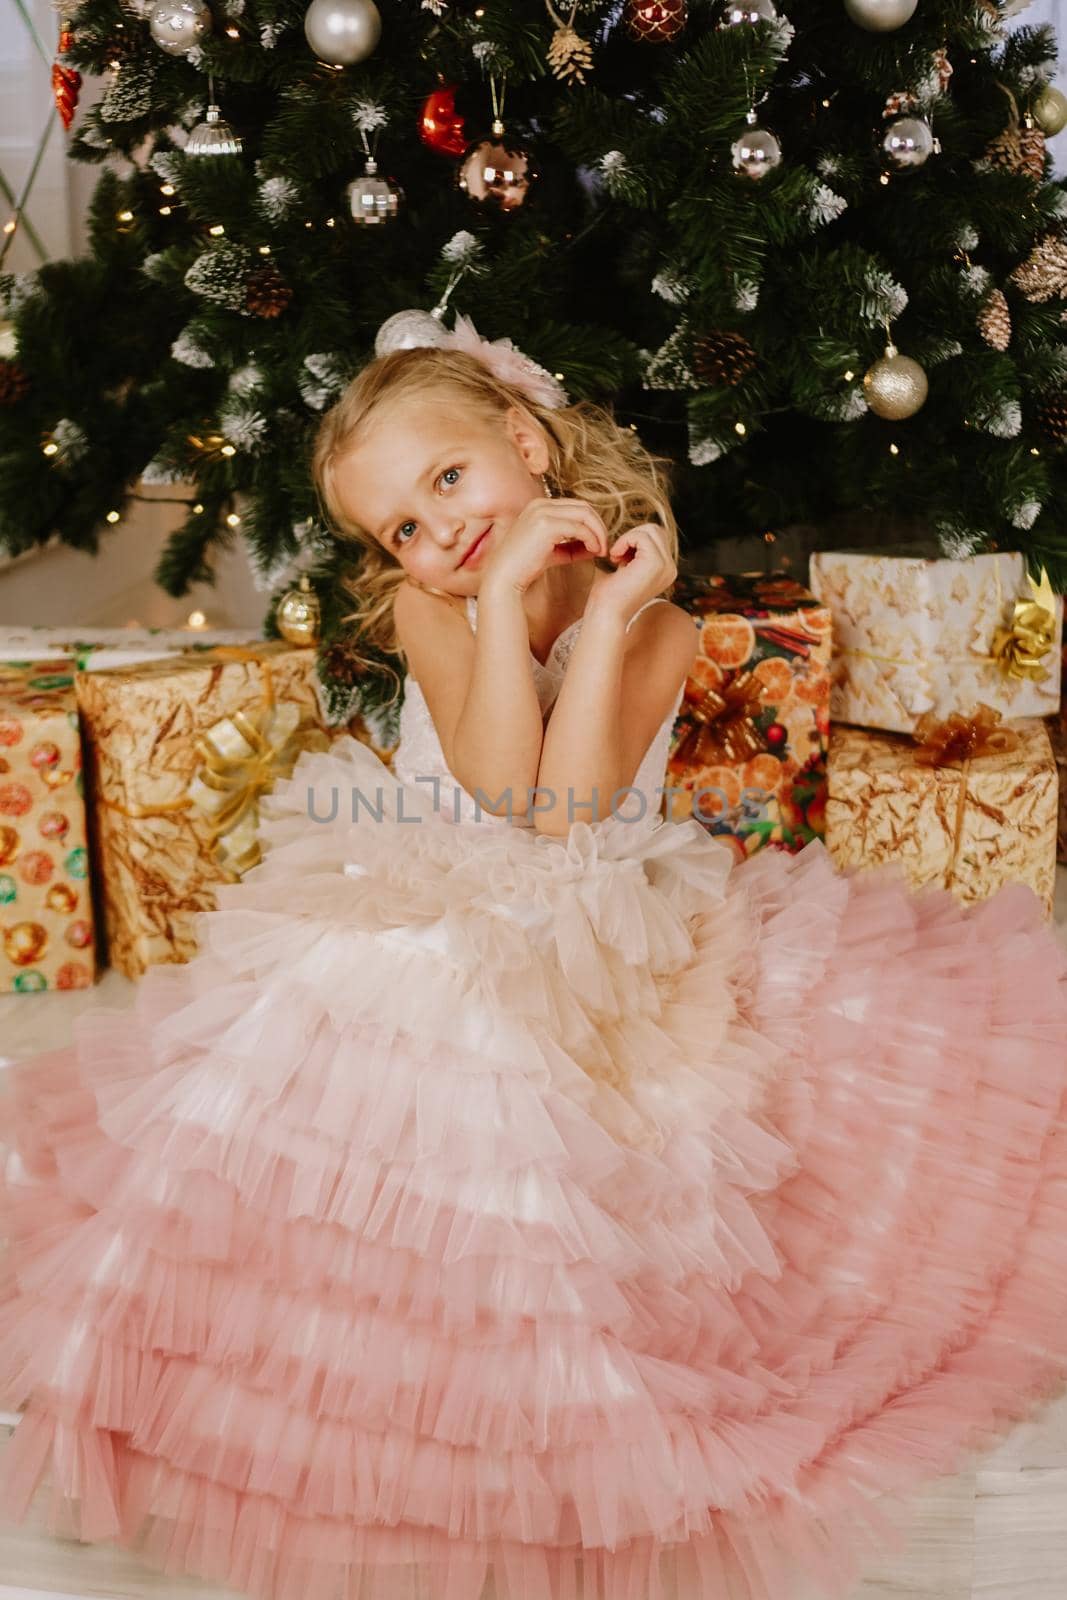 Girl in a pink dress near the Christmas tree by natali_brill